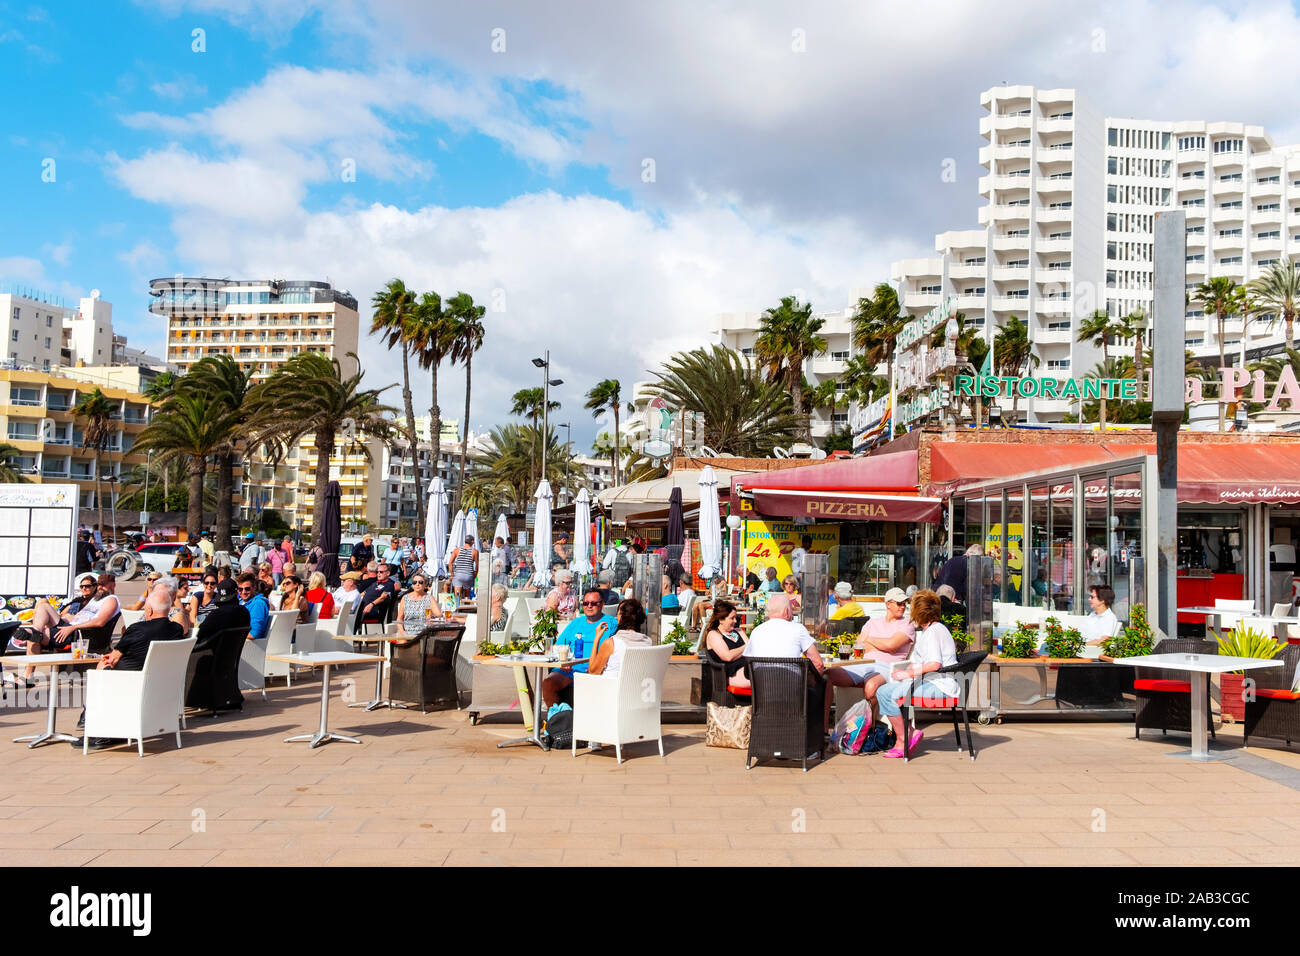 MASPALOMAS, SPAIN - JANUARY 21, 2019: Vacationers at the restaurant terraces of Playa del Ingles, in Maspalomas, in the Canary Islands, Spain, a popul Stock Photo